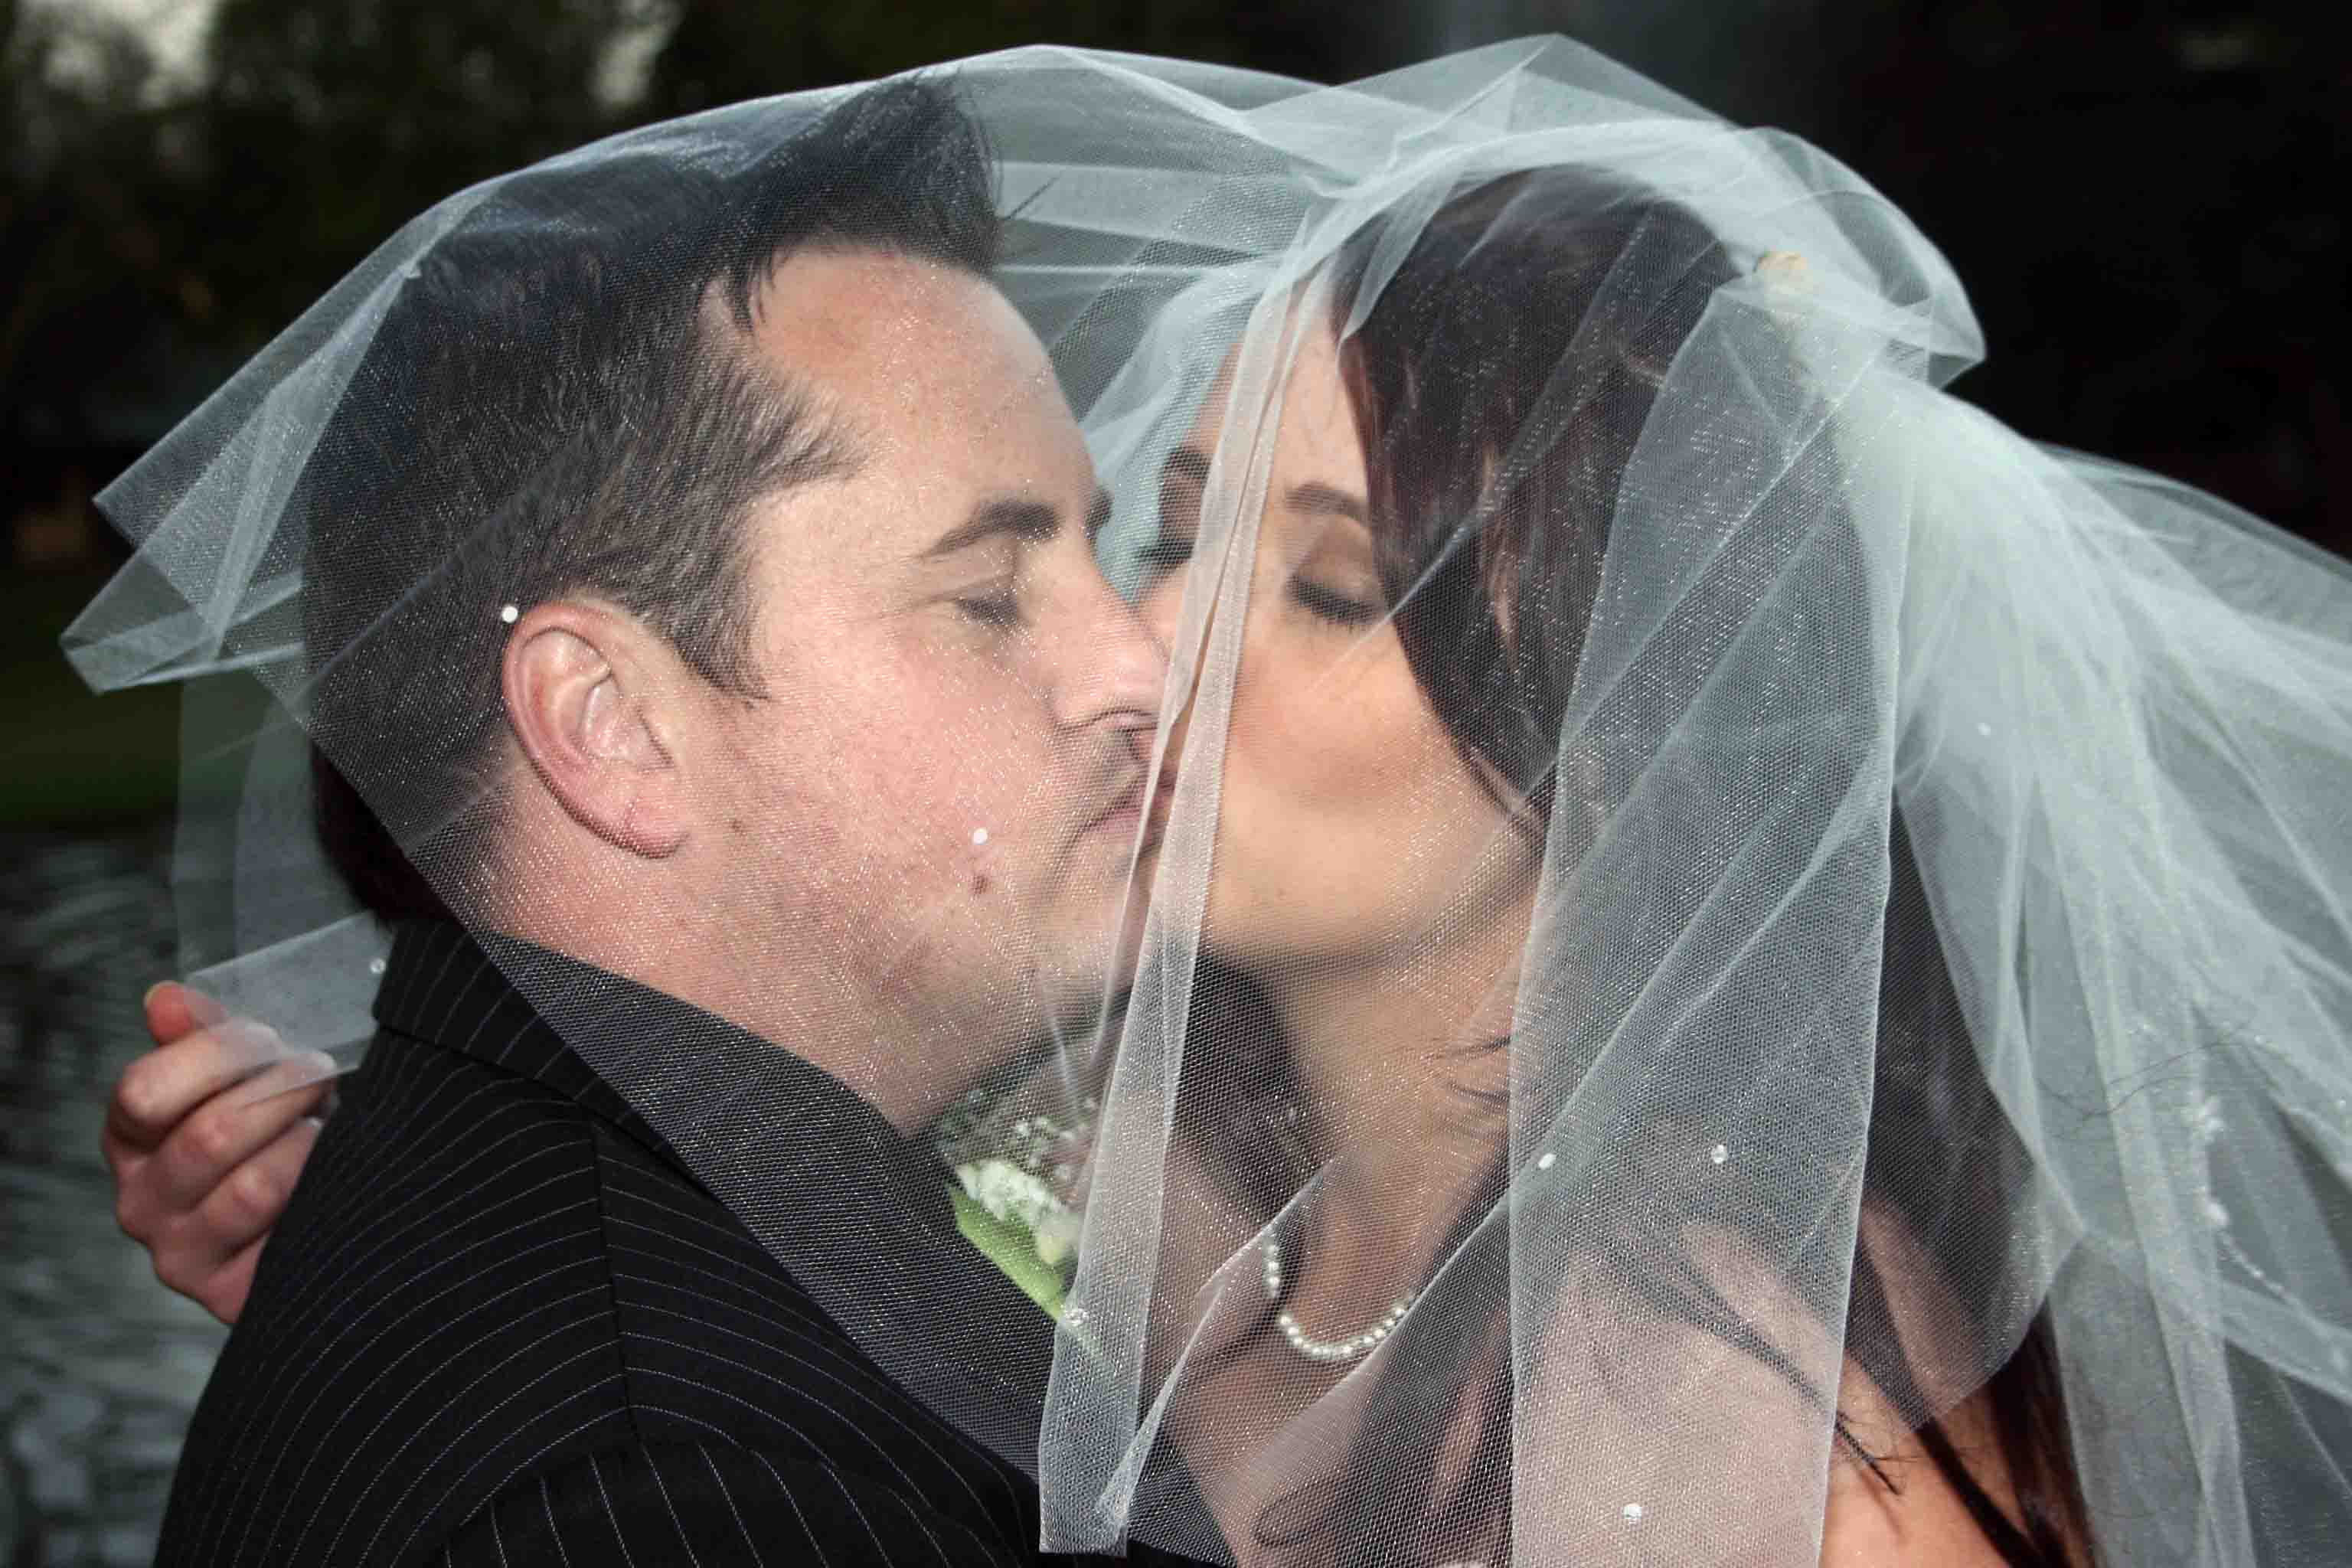 Morne and Jenna kissing under the veil.